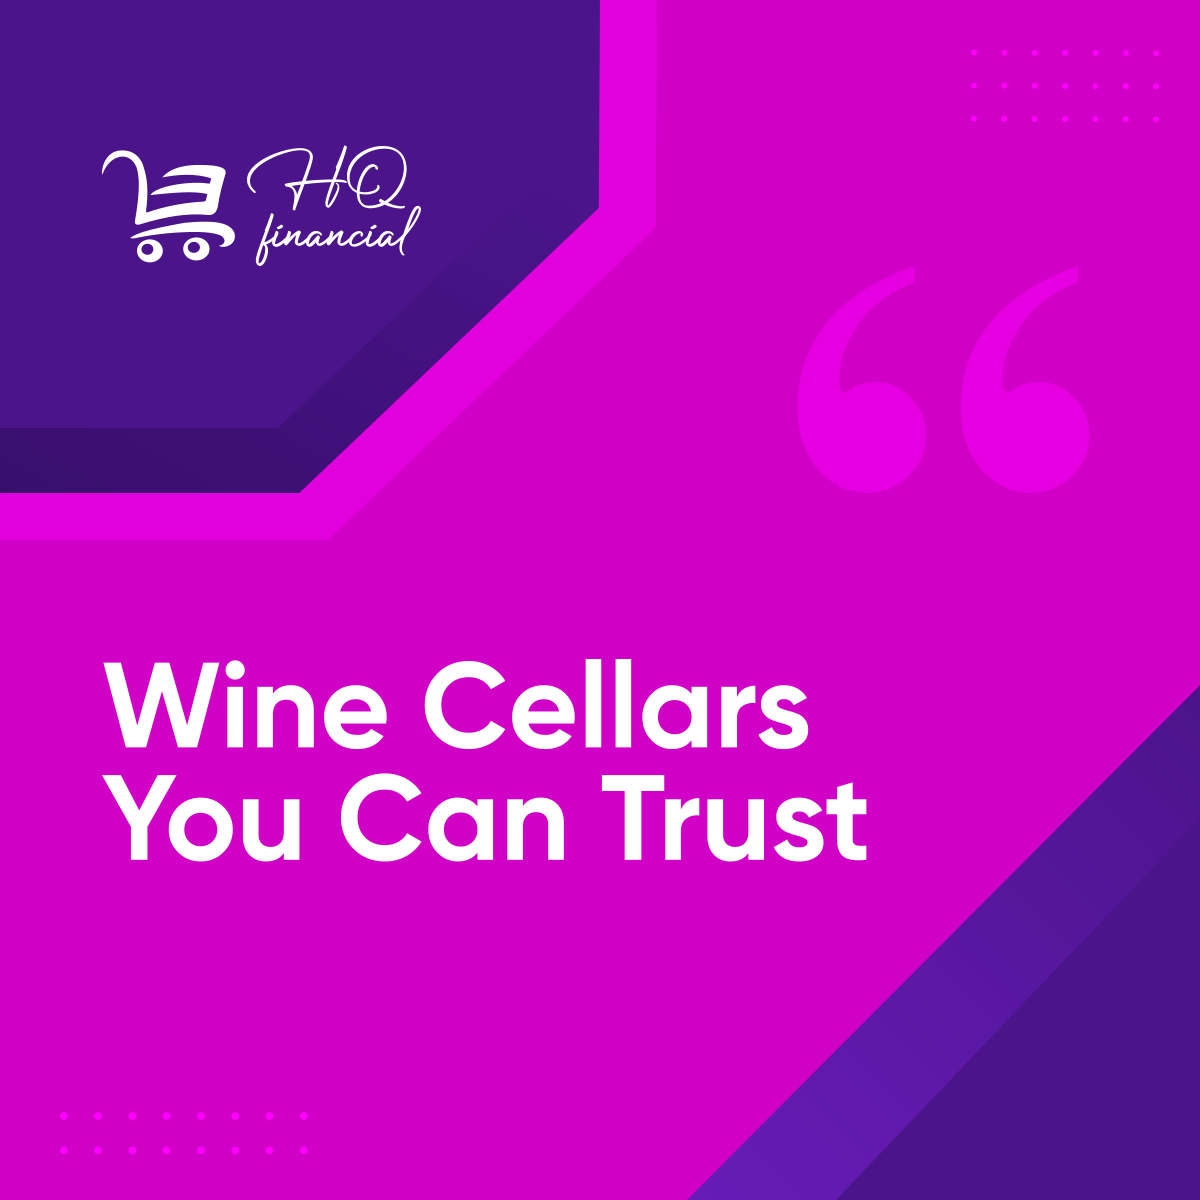 A wine cellar is designed for the long-term storage of wine. The ideal condition for storing wine should be dark, cool, and humid.

Are you looking for a wine cellar for your drinks? Visit us today!

#WineCellars #AbingdonMD #HQFinancialLLC